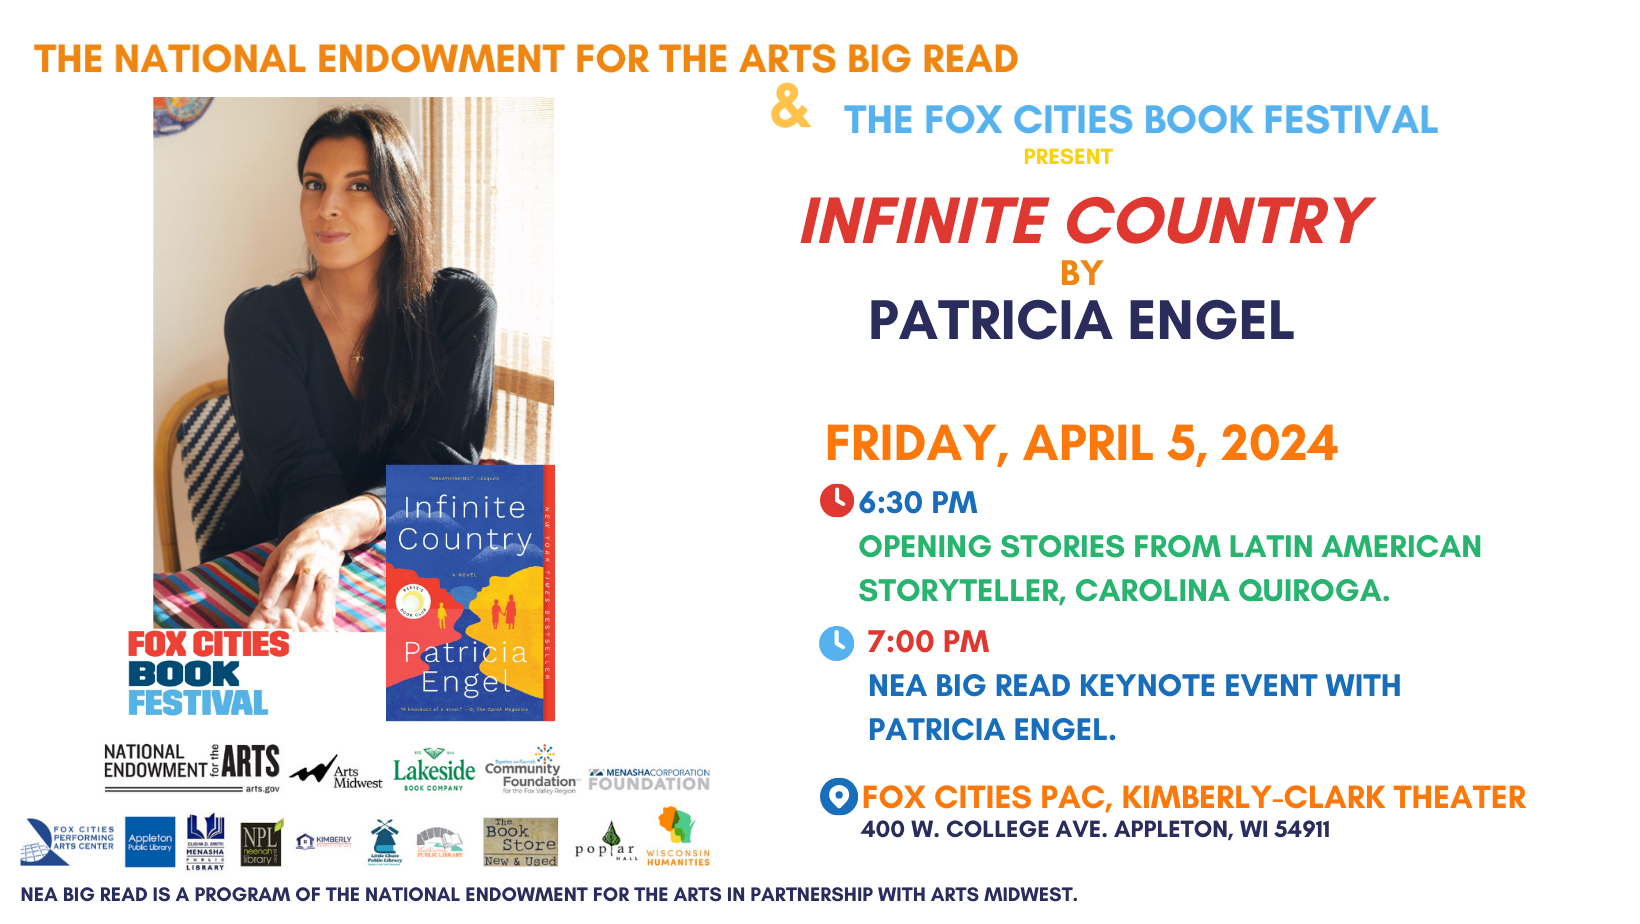 NEA Big Read Author Patricia Engel event on April 5, 2024 at 7 pm